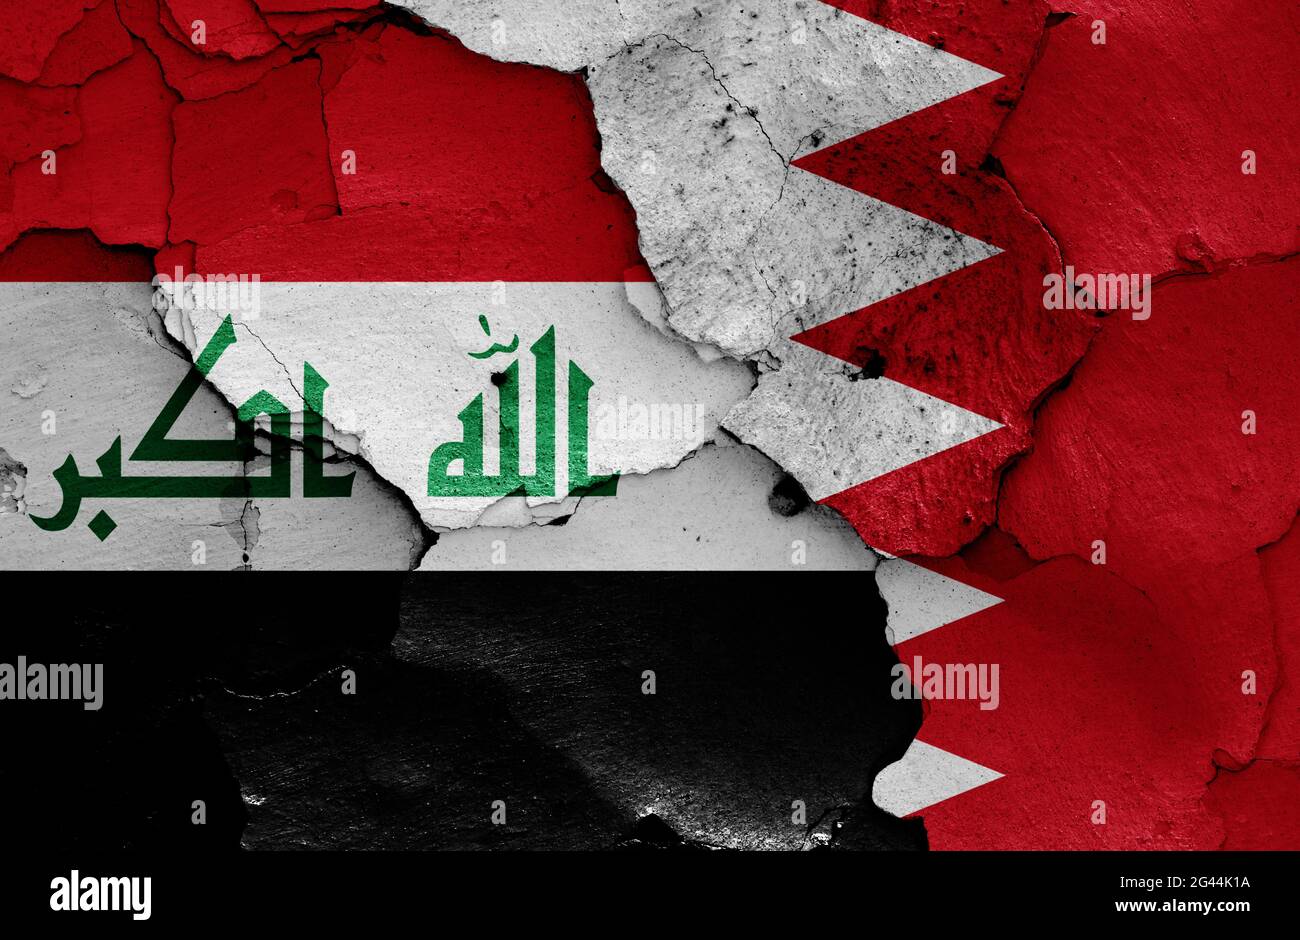 Flags of Iraq and Bahrain painted on cracked wall Stock Photo